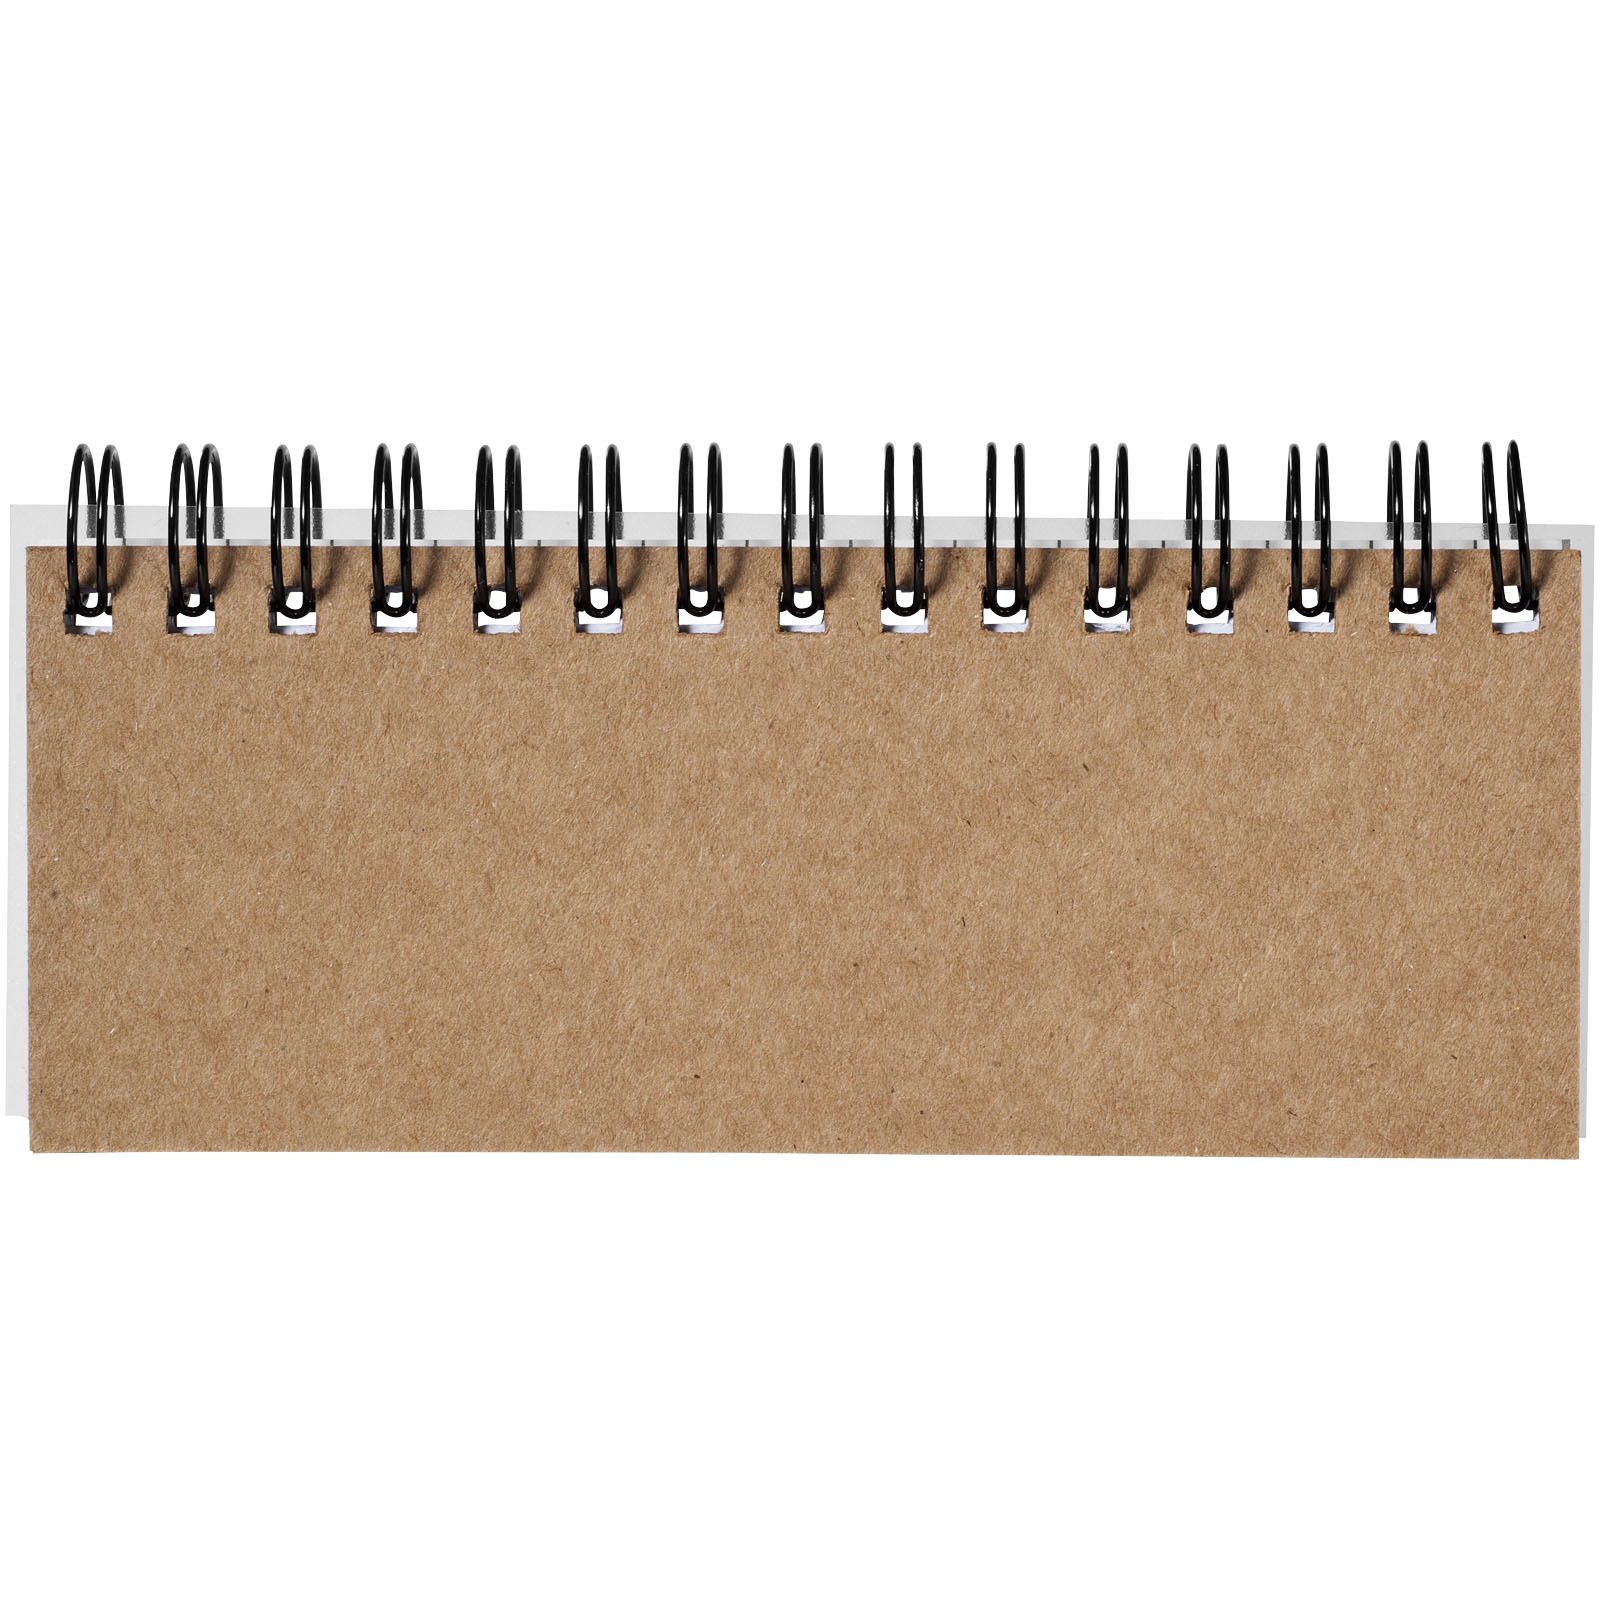 Advertising Soft cover notebooks - Spinner spiral notebook with coloured sticky notes - 2